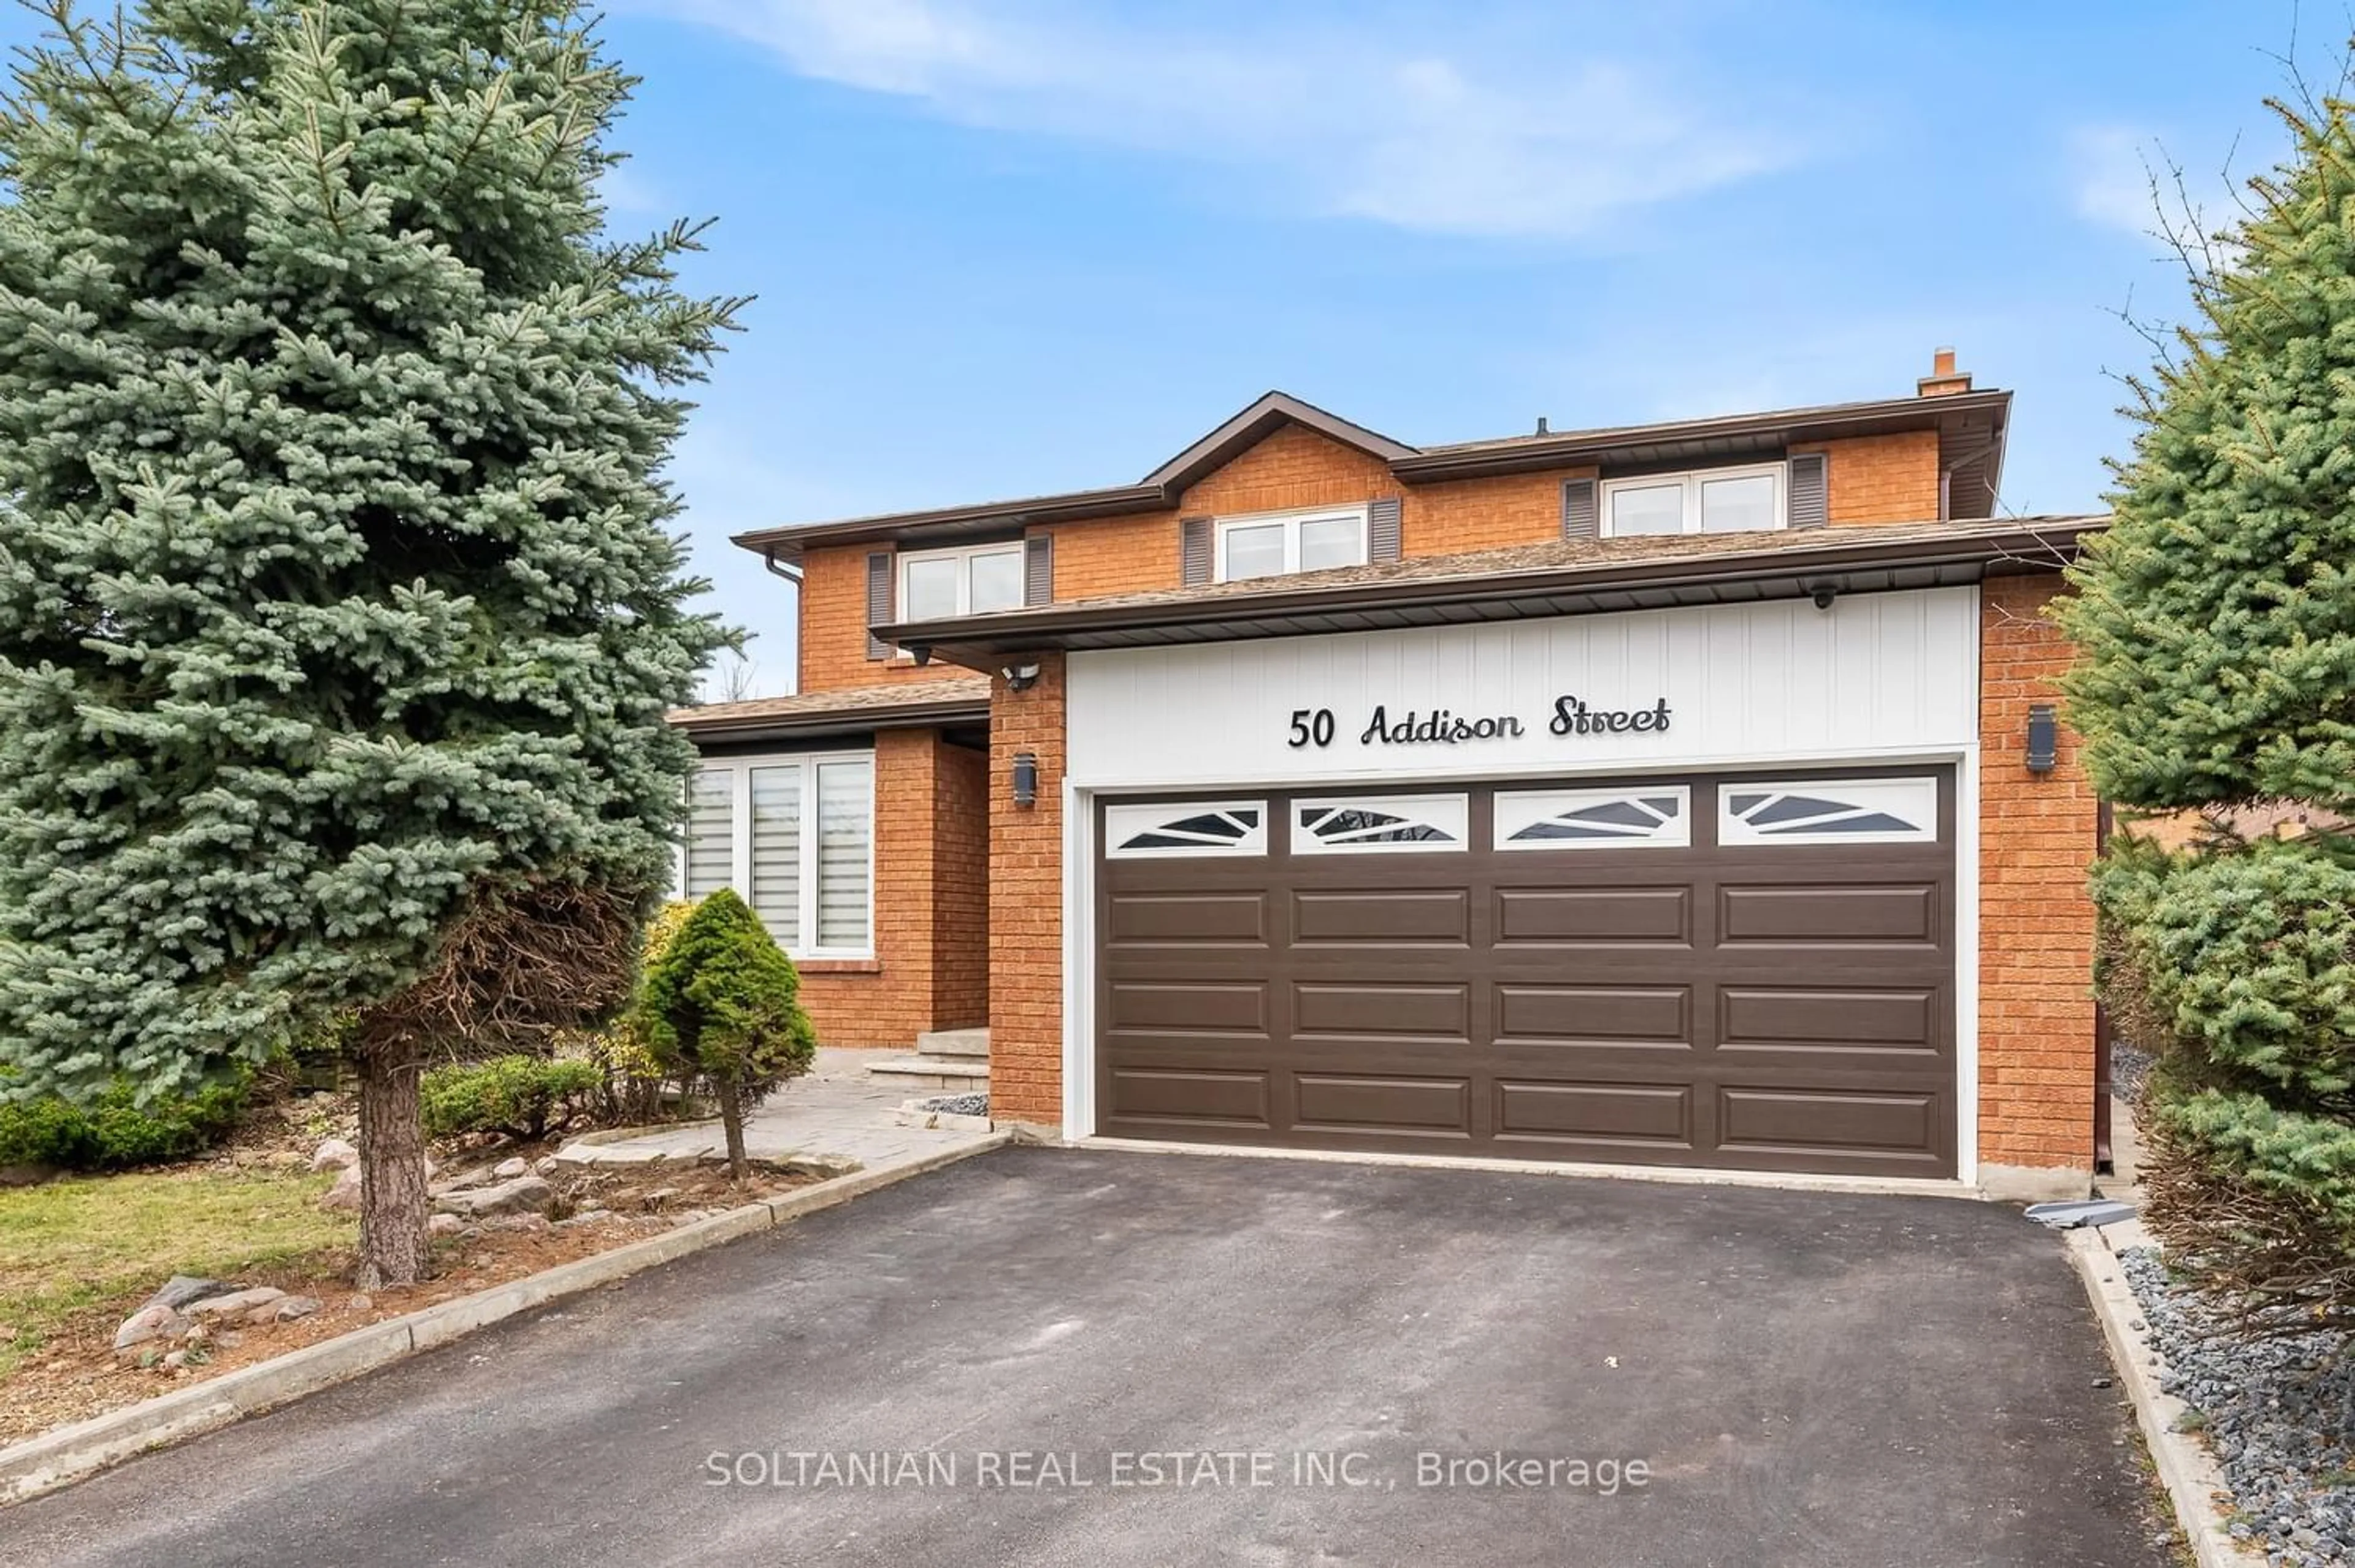 Home with brick exterior material for 50 Addison St, Richmond Hill Ontario L4C 7L8